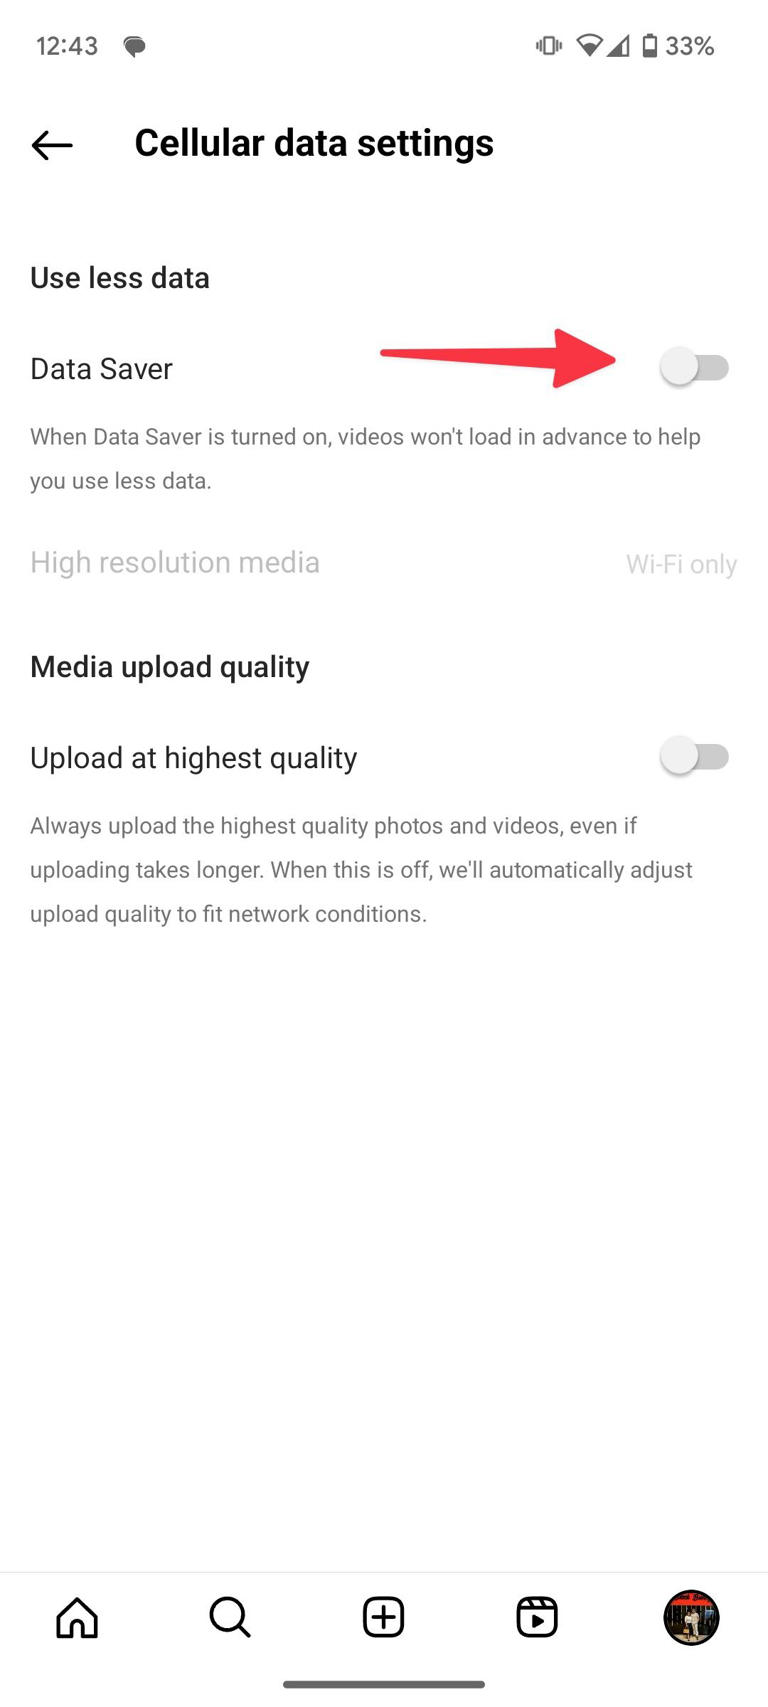 data saver toggle on Instagram on Android